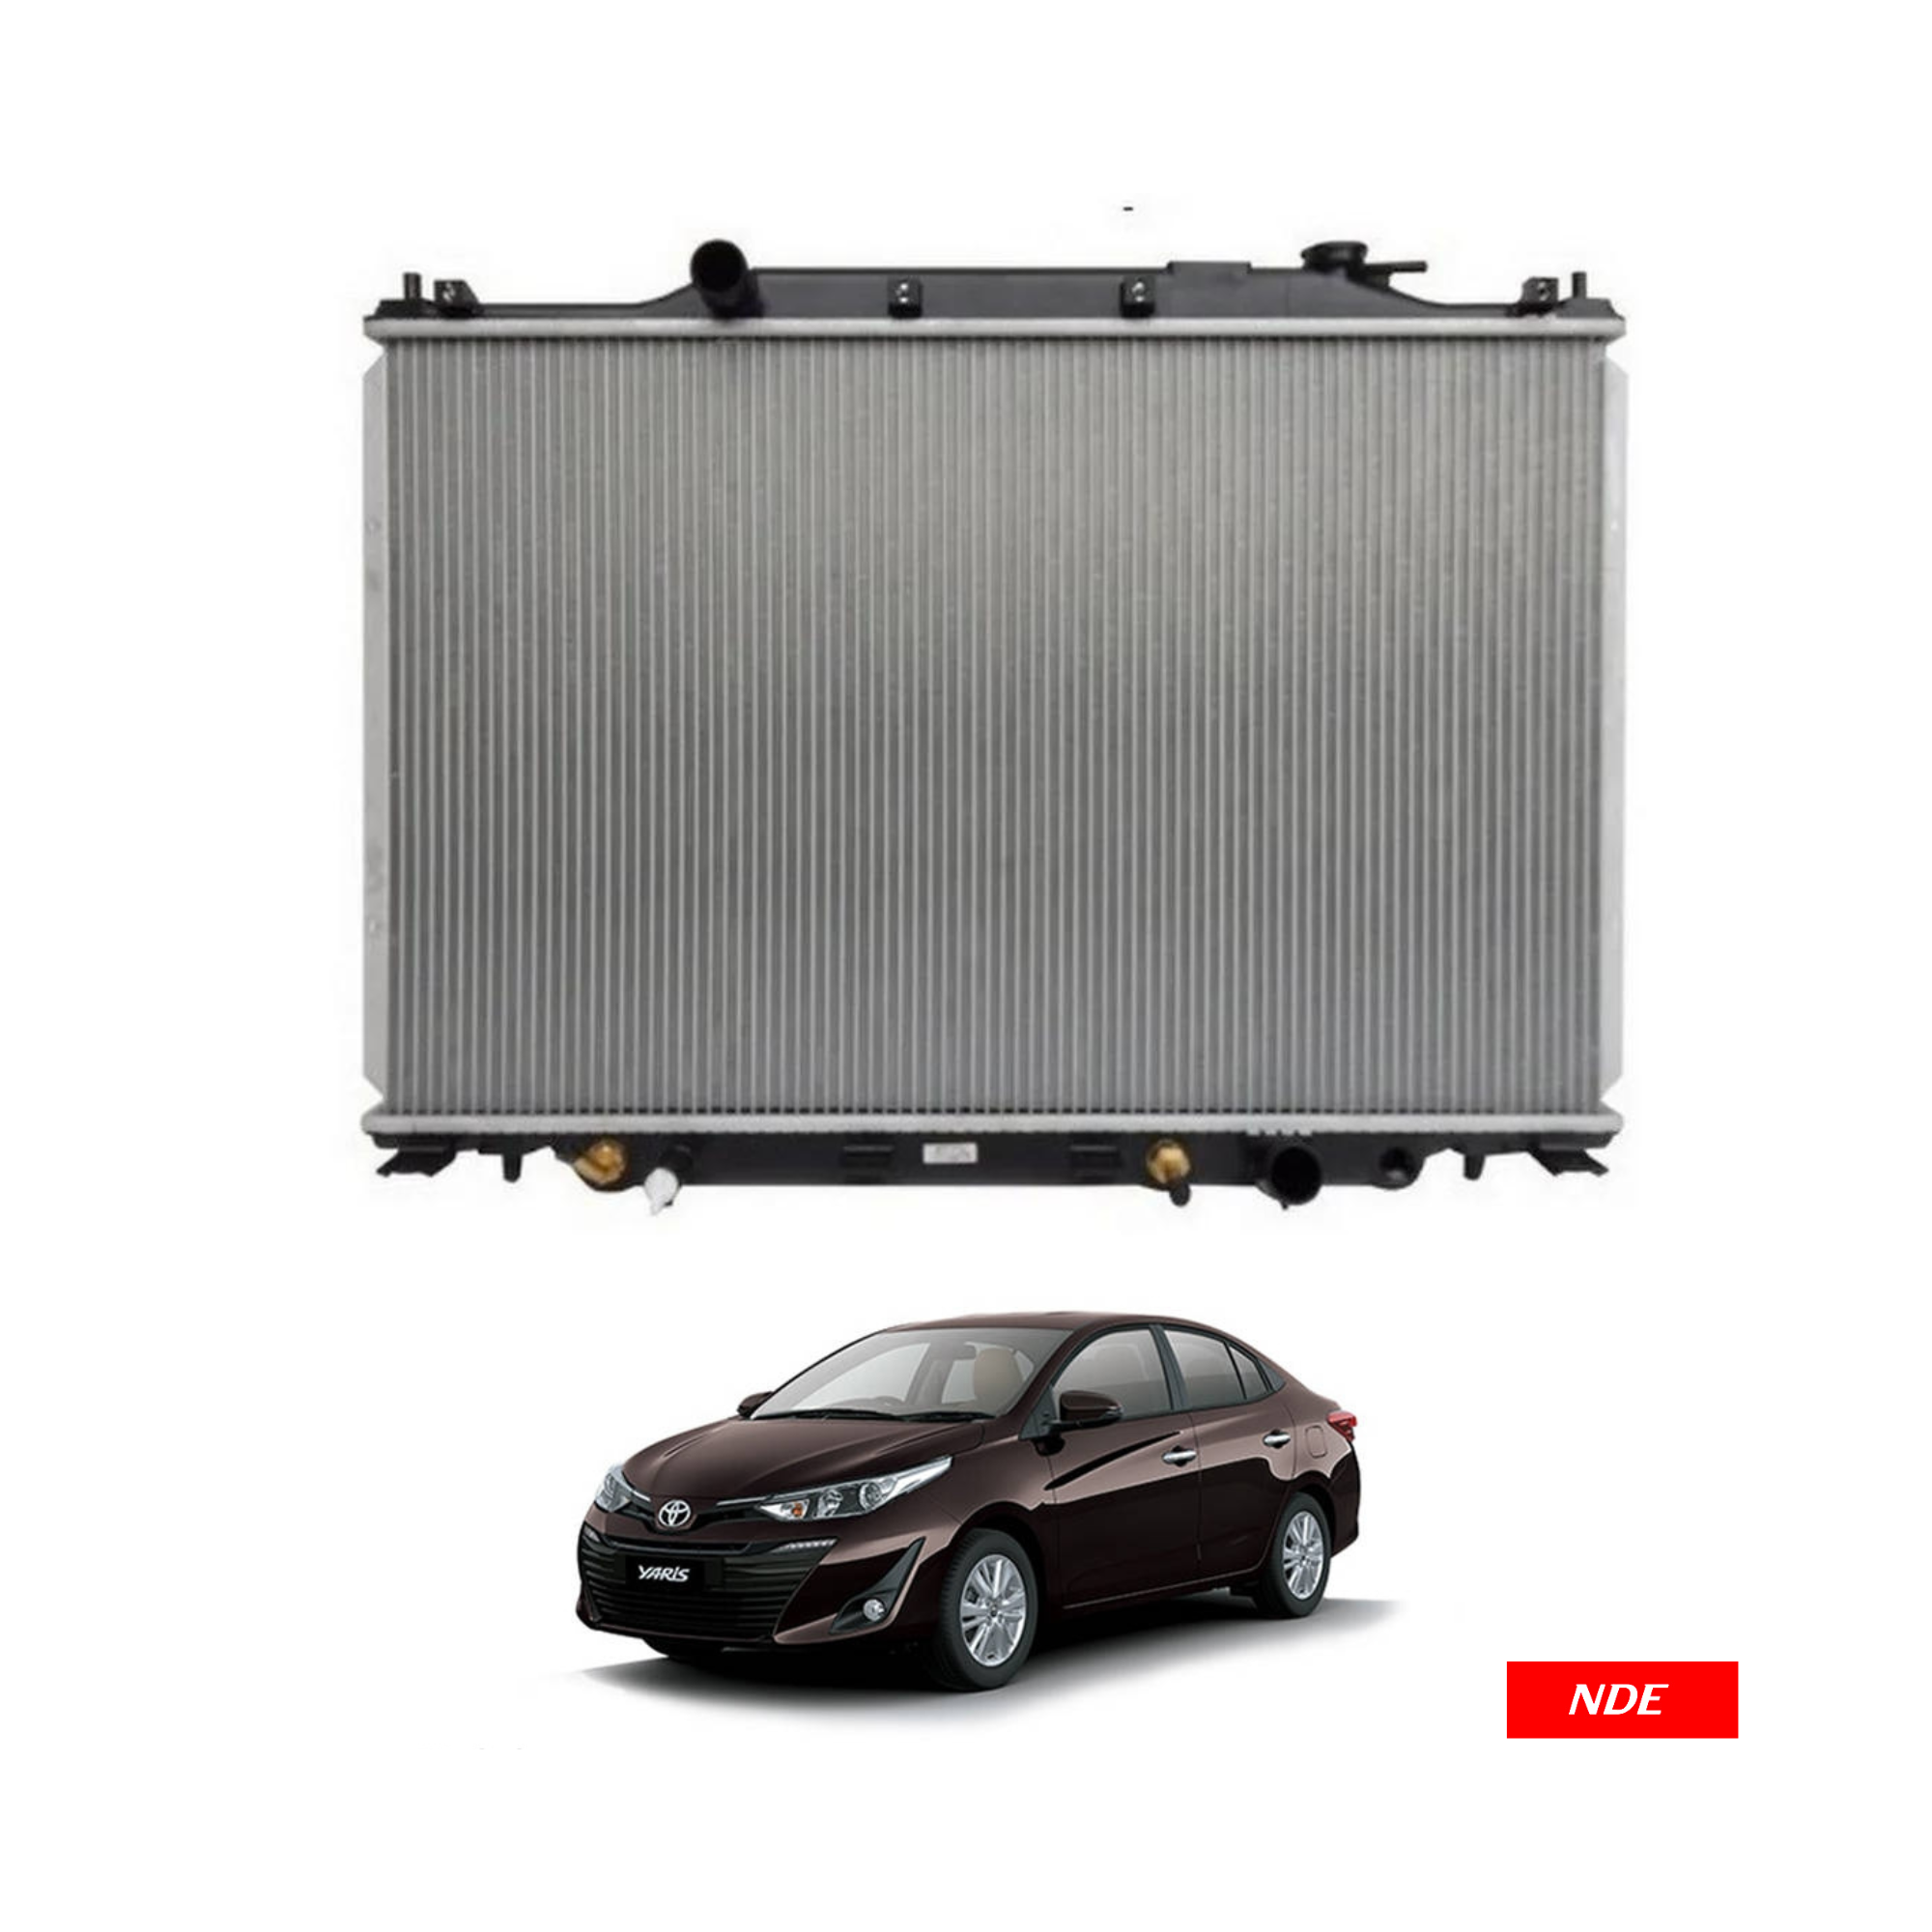 RADIATOR ASSY, COMPLETE FOR TOYOTA YARIS